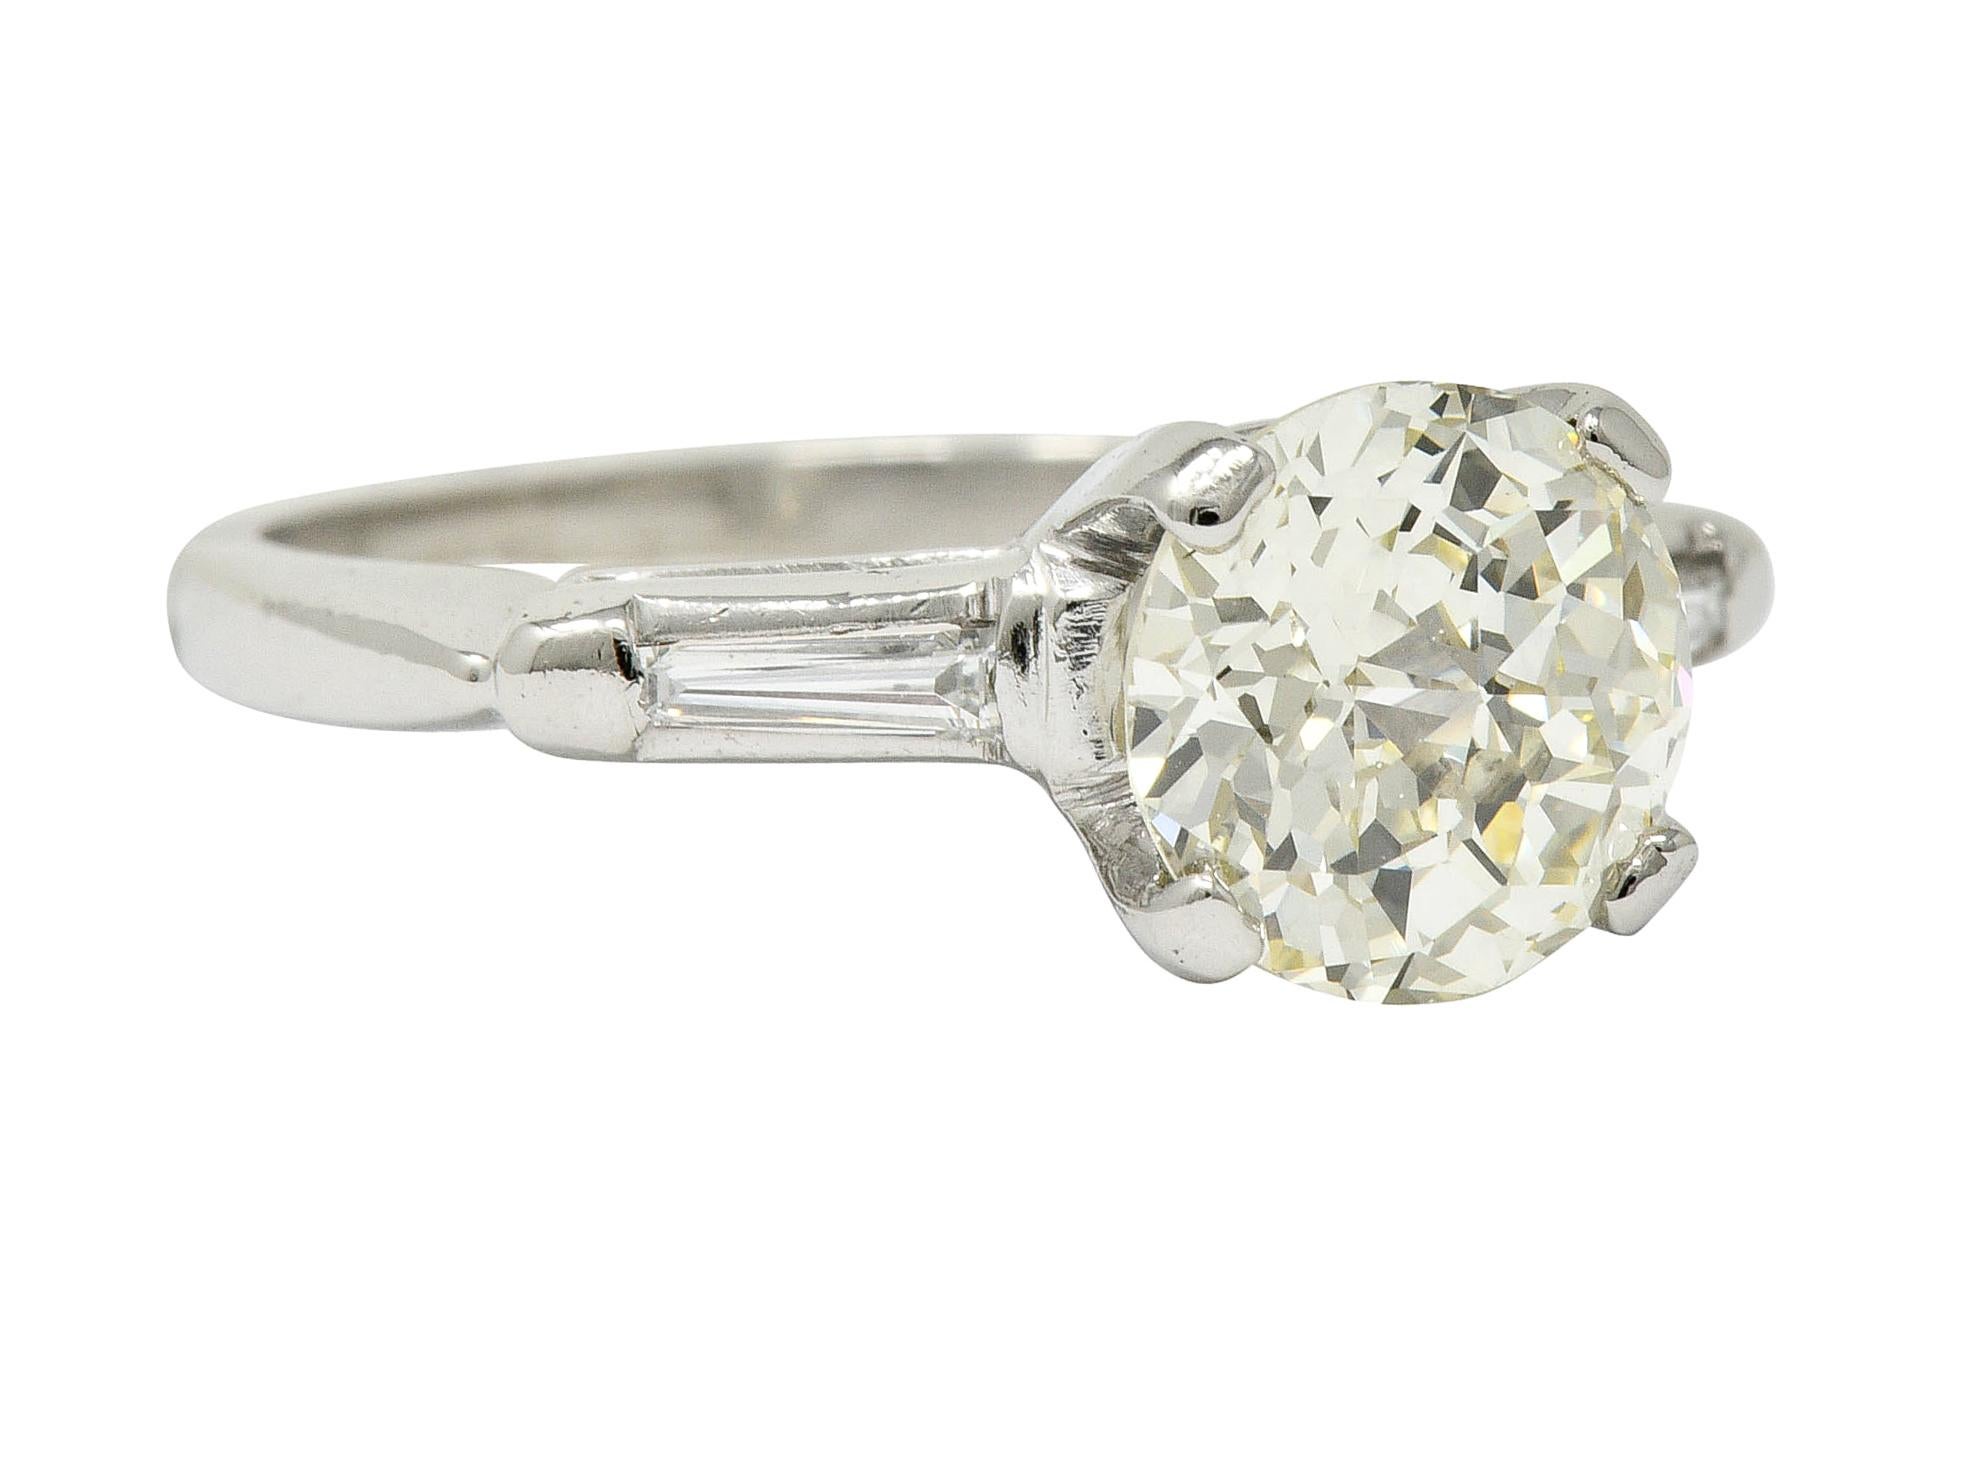 Centering a basket set jubilee cut round diamond weighing 1.72 carat; N color with VVS2 clarity

Flanked by two bar set tapered baguette cut diamonds weighing approximately 0.10 carat; eye-clean and white

Mounting is stamped for platinum, circa